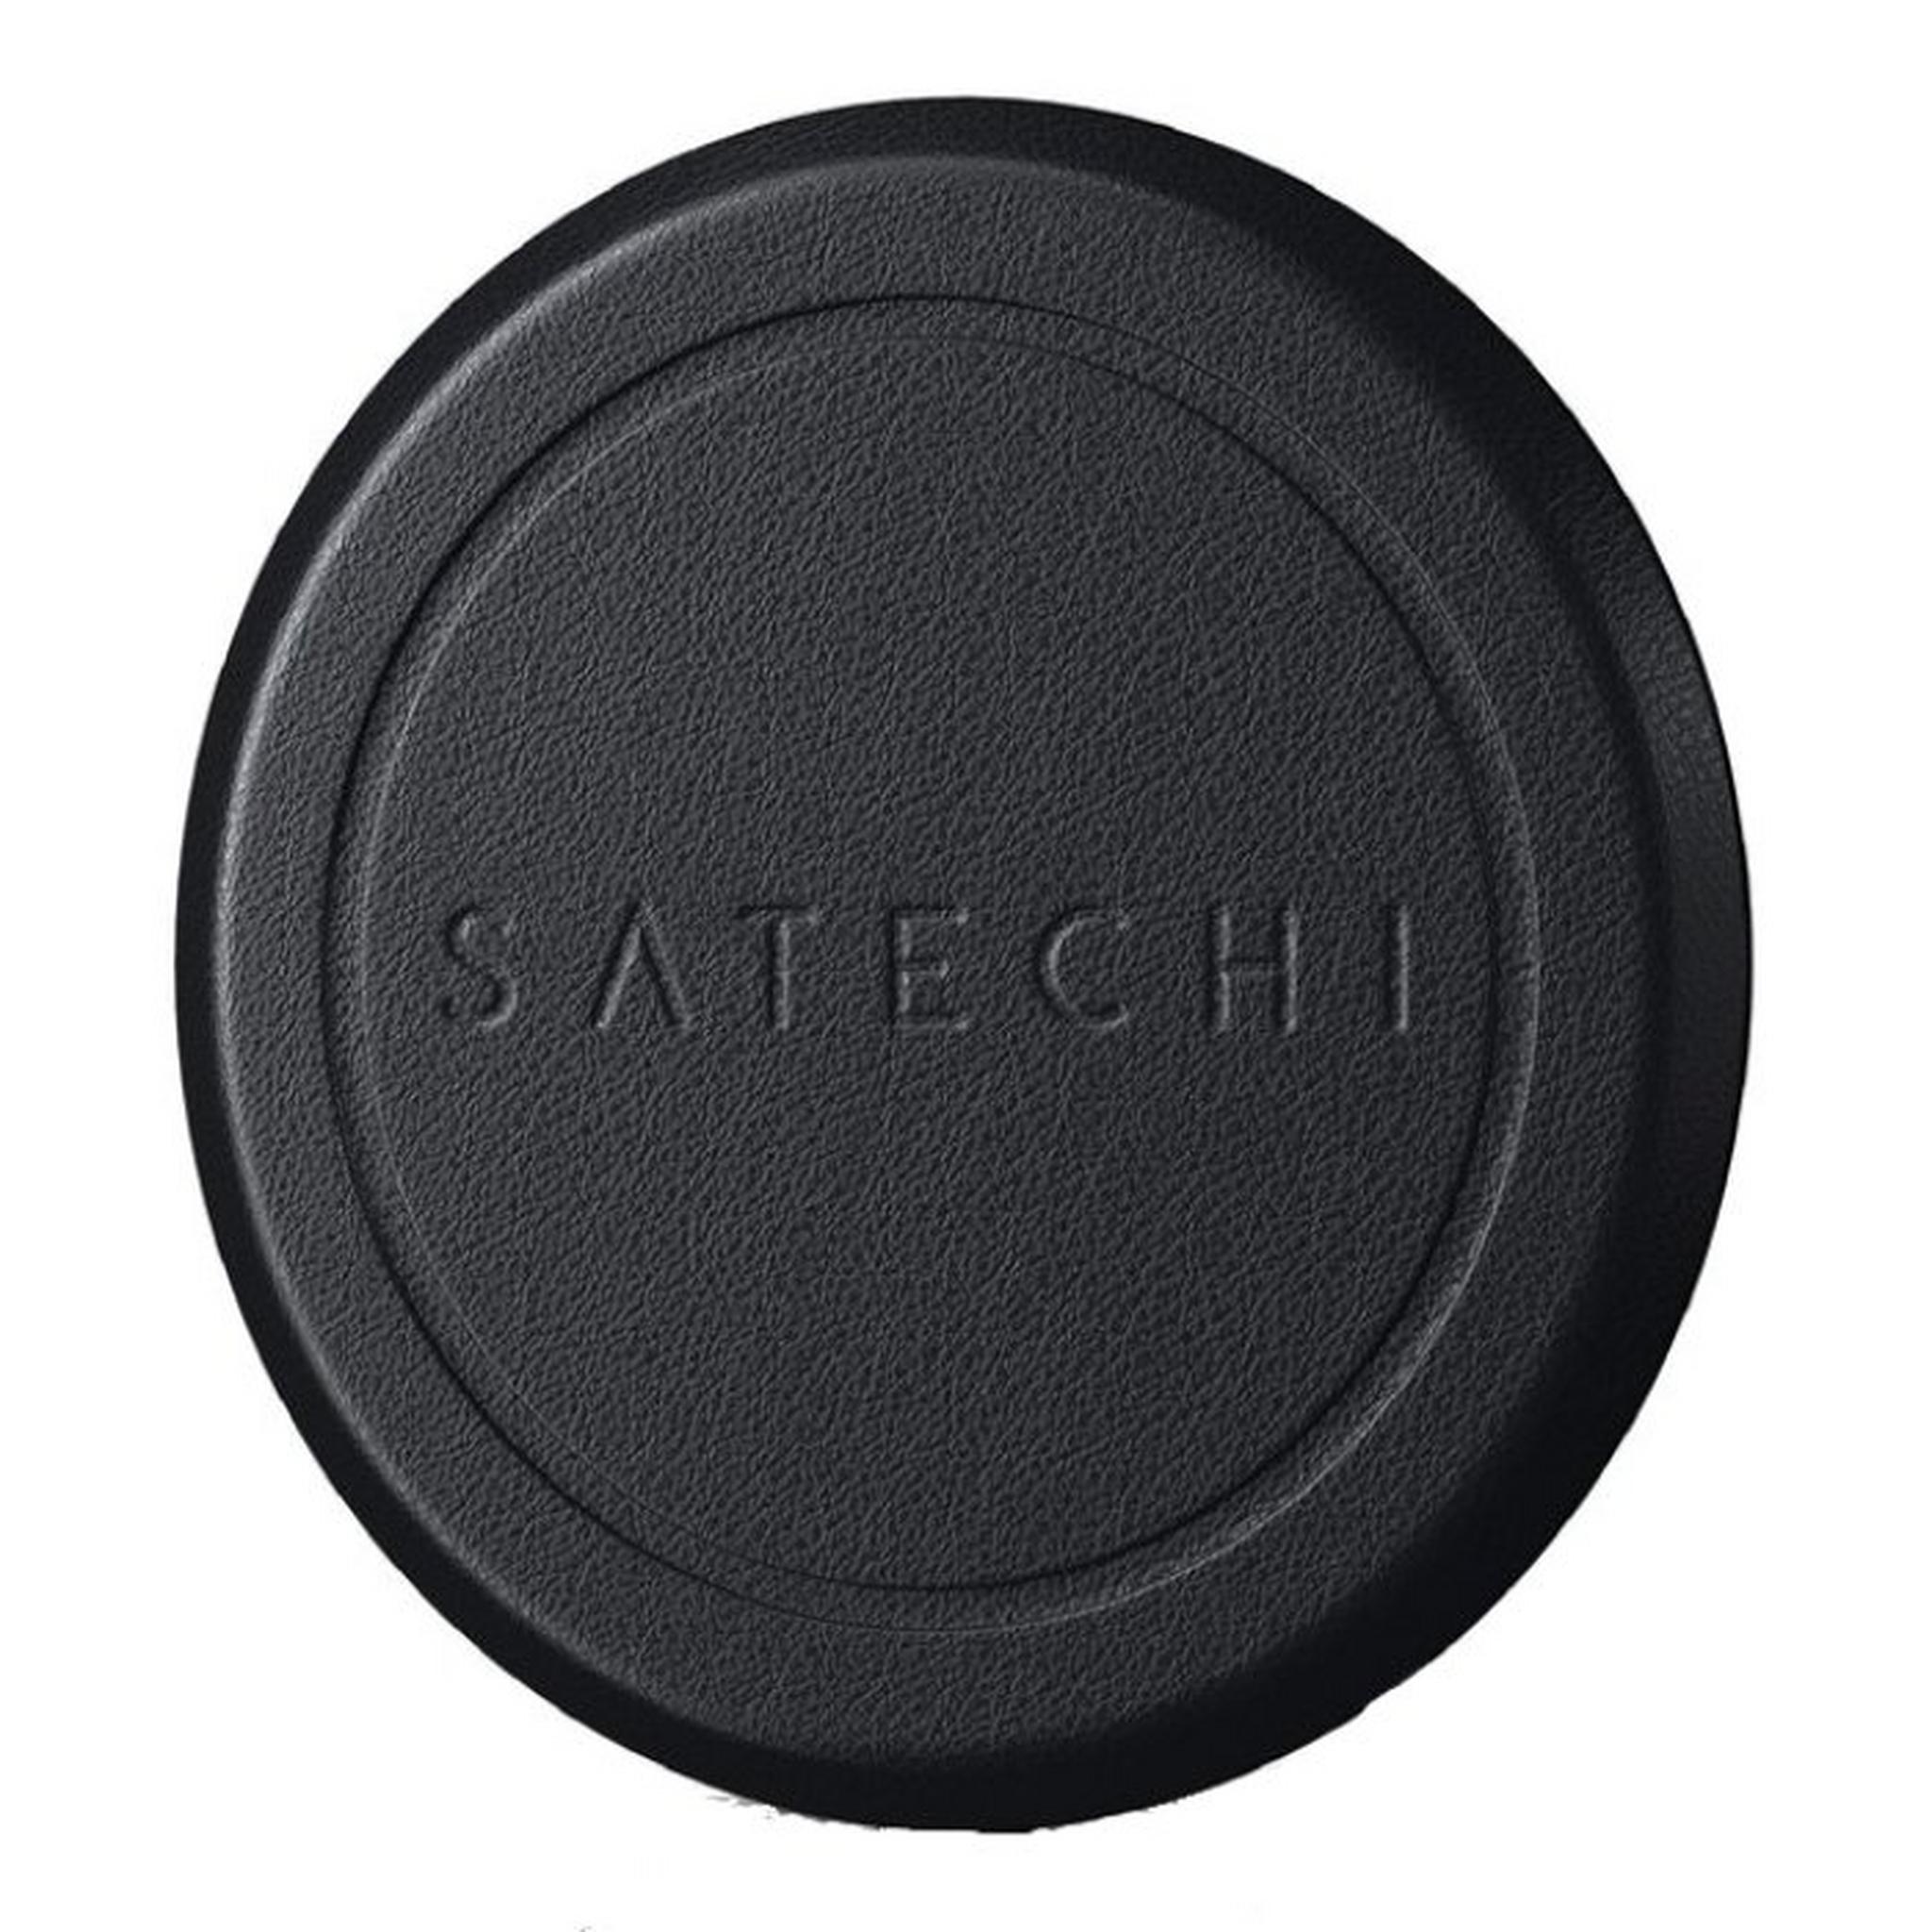 Satechi Magnetic Sticker for iPhone 11/12